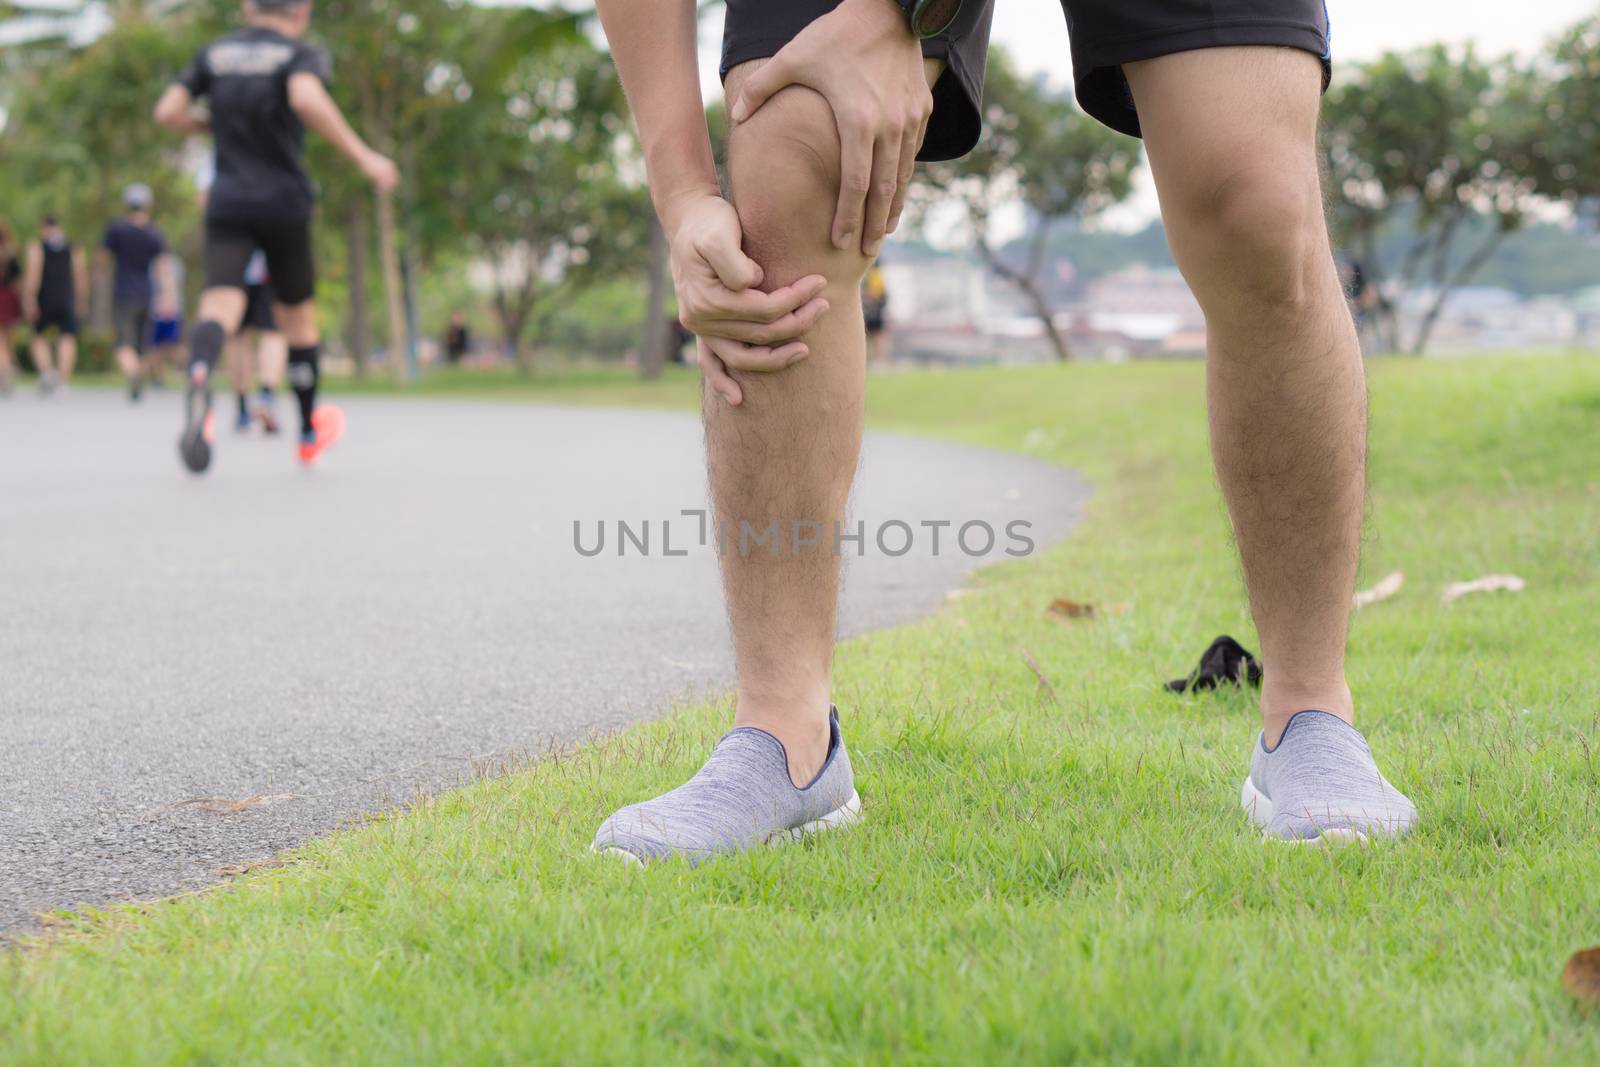 Knee Injuries. Young sport man holding knee with his hands in pain after suffering muscle injury during a running workout at park. Healthcare and sport concept.